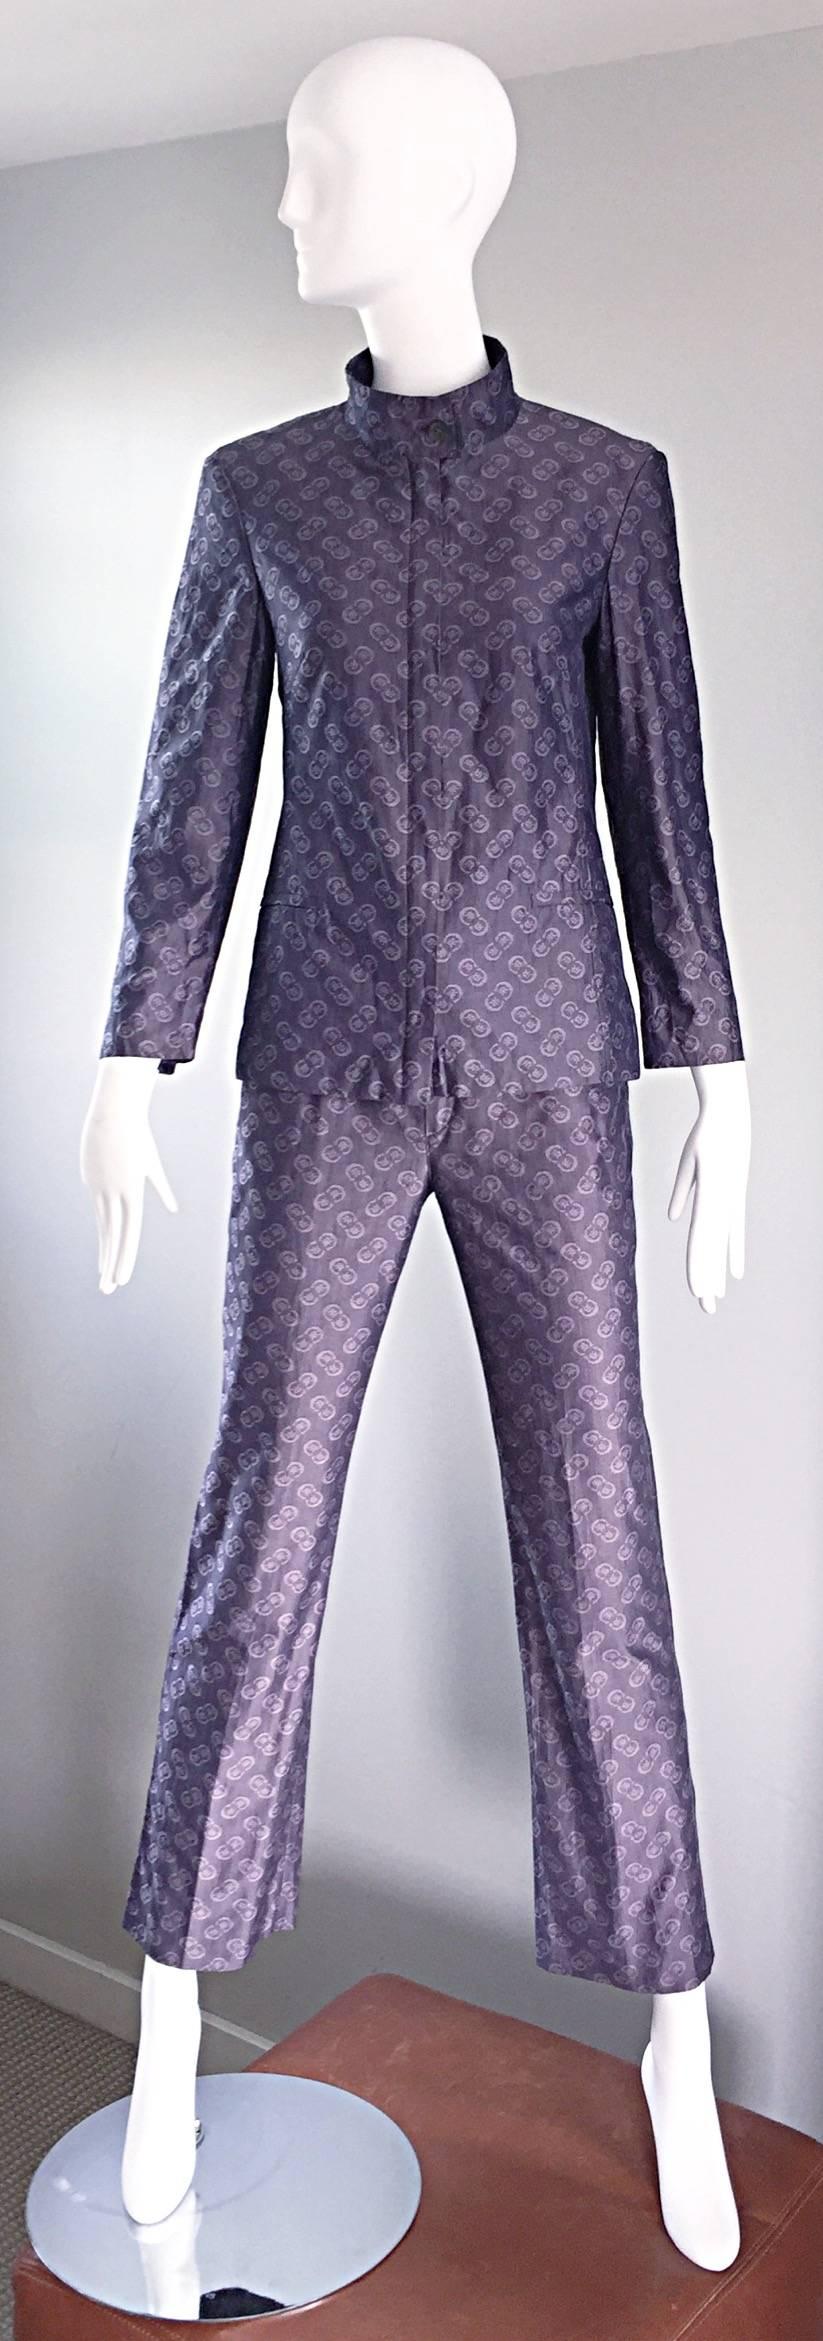 Impeccably tailored vintage NINO CERRUTI 1881 trouser suit, in the chic pajama style! Not meant to be worn as pajamas, but rather a classic tailored look. Discreet logo print throughout. Vintage Cerruti pieces are extremely hard to come by for